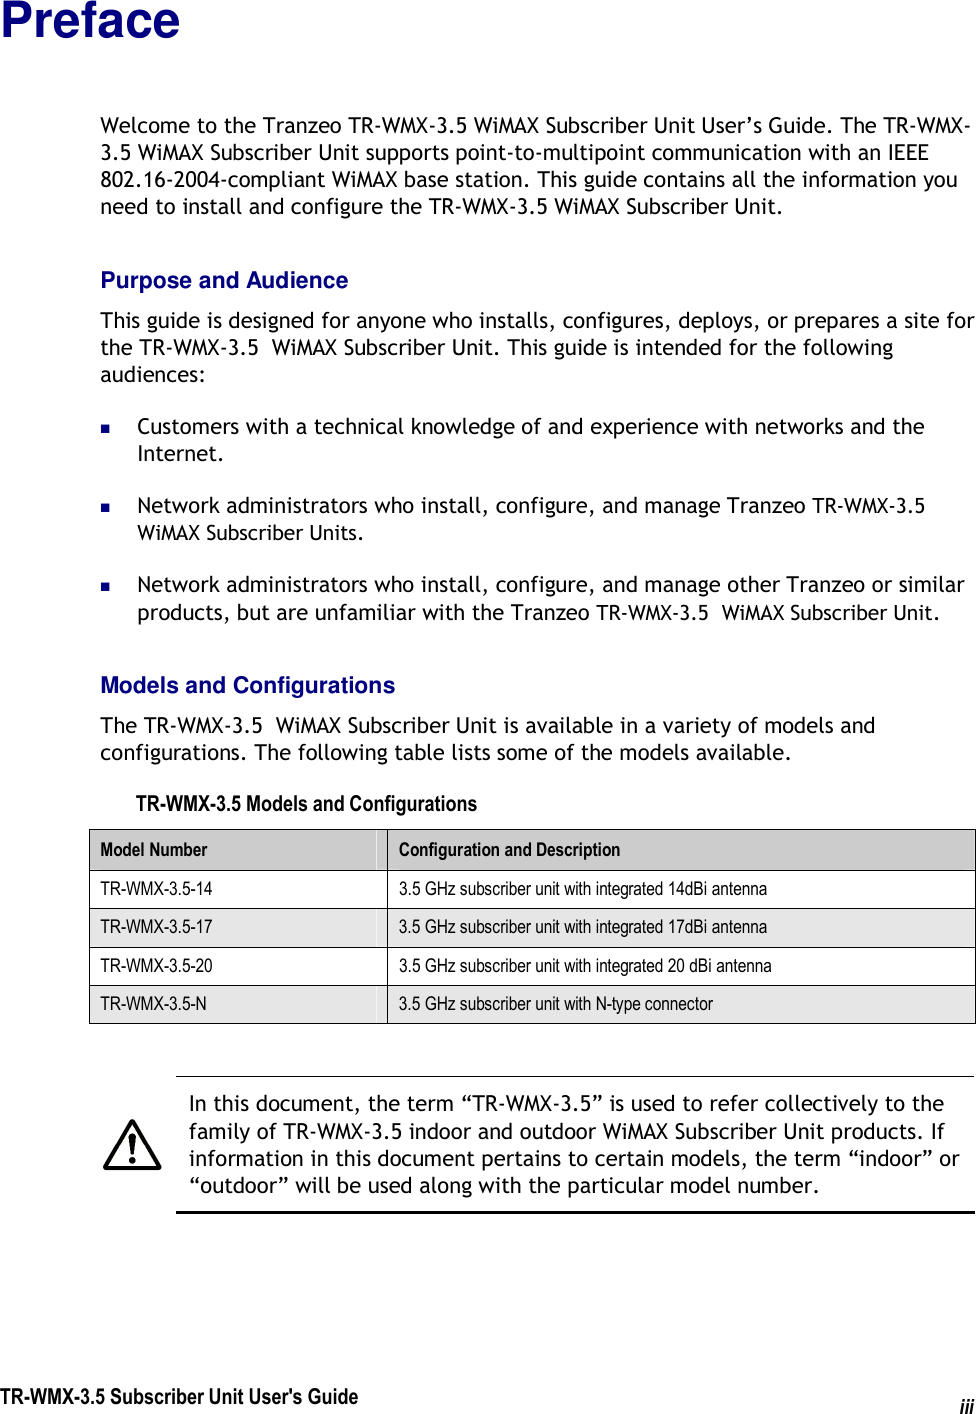 TR-WMX-3.5 Subscriber Unit User&apos;s Guide iii Preface Welcome to the Tranzeo TR-WMX-3.5 WiMAX Subscriber Unit User’s Guide. The TR-WMX-3.5 WiMAX Subscriber Unit supports point-to-multipoint communication with an IEEE 802.16-2004-compliant WiMAX base station. This guide contains all the information you need to install and configure the TR-WMX-3.5 WiMAX Subscriber Unit. Purpose and Audience This guide is designed for anyone who installs, configures, deploys, or prepares a site for the TR-WMX-3.5  WiMAX Subscriber Unit. This guide is intended for the following audiences:  Customers with a technical knowledge of and experience with networks and the Internet.  Network administrators who install, configure, and manage Tranzeo TR-WMX-3.5  WiMAX Subscriber Units.  Network administrators who install, configure, and manage other Tranzeo or similar products, but are unfamiliar with the Tranzeo TR-WMX-3.5  WiMAX Subscriber Unit. Models and Configurations The TR-WMX-3.5  WiMAX Subscriber Unit is available in a variety of models and configurations. The following table lists some of the models available. TR-WMX-3.5 Models and Configurations Model Number  Configuration and Description TR-WMX-3.5-14  3.5 GHz subscriber unit with integrated 14dBi antenna TR-WMX-3.5-17  3.5 GHz subscriber unit with integrated 17dBi antenna TR-WMX-3.5-20  3.5 GHz subscriber unit with integrated 20 dBi antenna TR-WMX-3.5-N  3.5 GHz subscriber unit with N-type connector   In this document, the term “TR-WMX-3.5” is used to refer collectively to the family of TR-WMX-3.5 indoor and outdoor WiMAX Subscriber Unit products. If information in this document pertains to certain models, the term “indoor” or “outdoor” will be used along with the particular model number.  